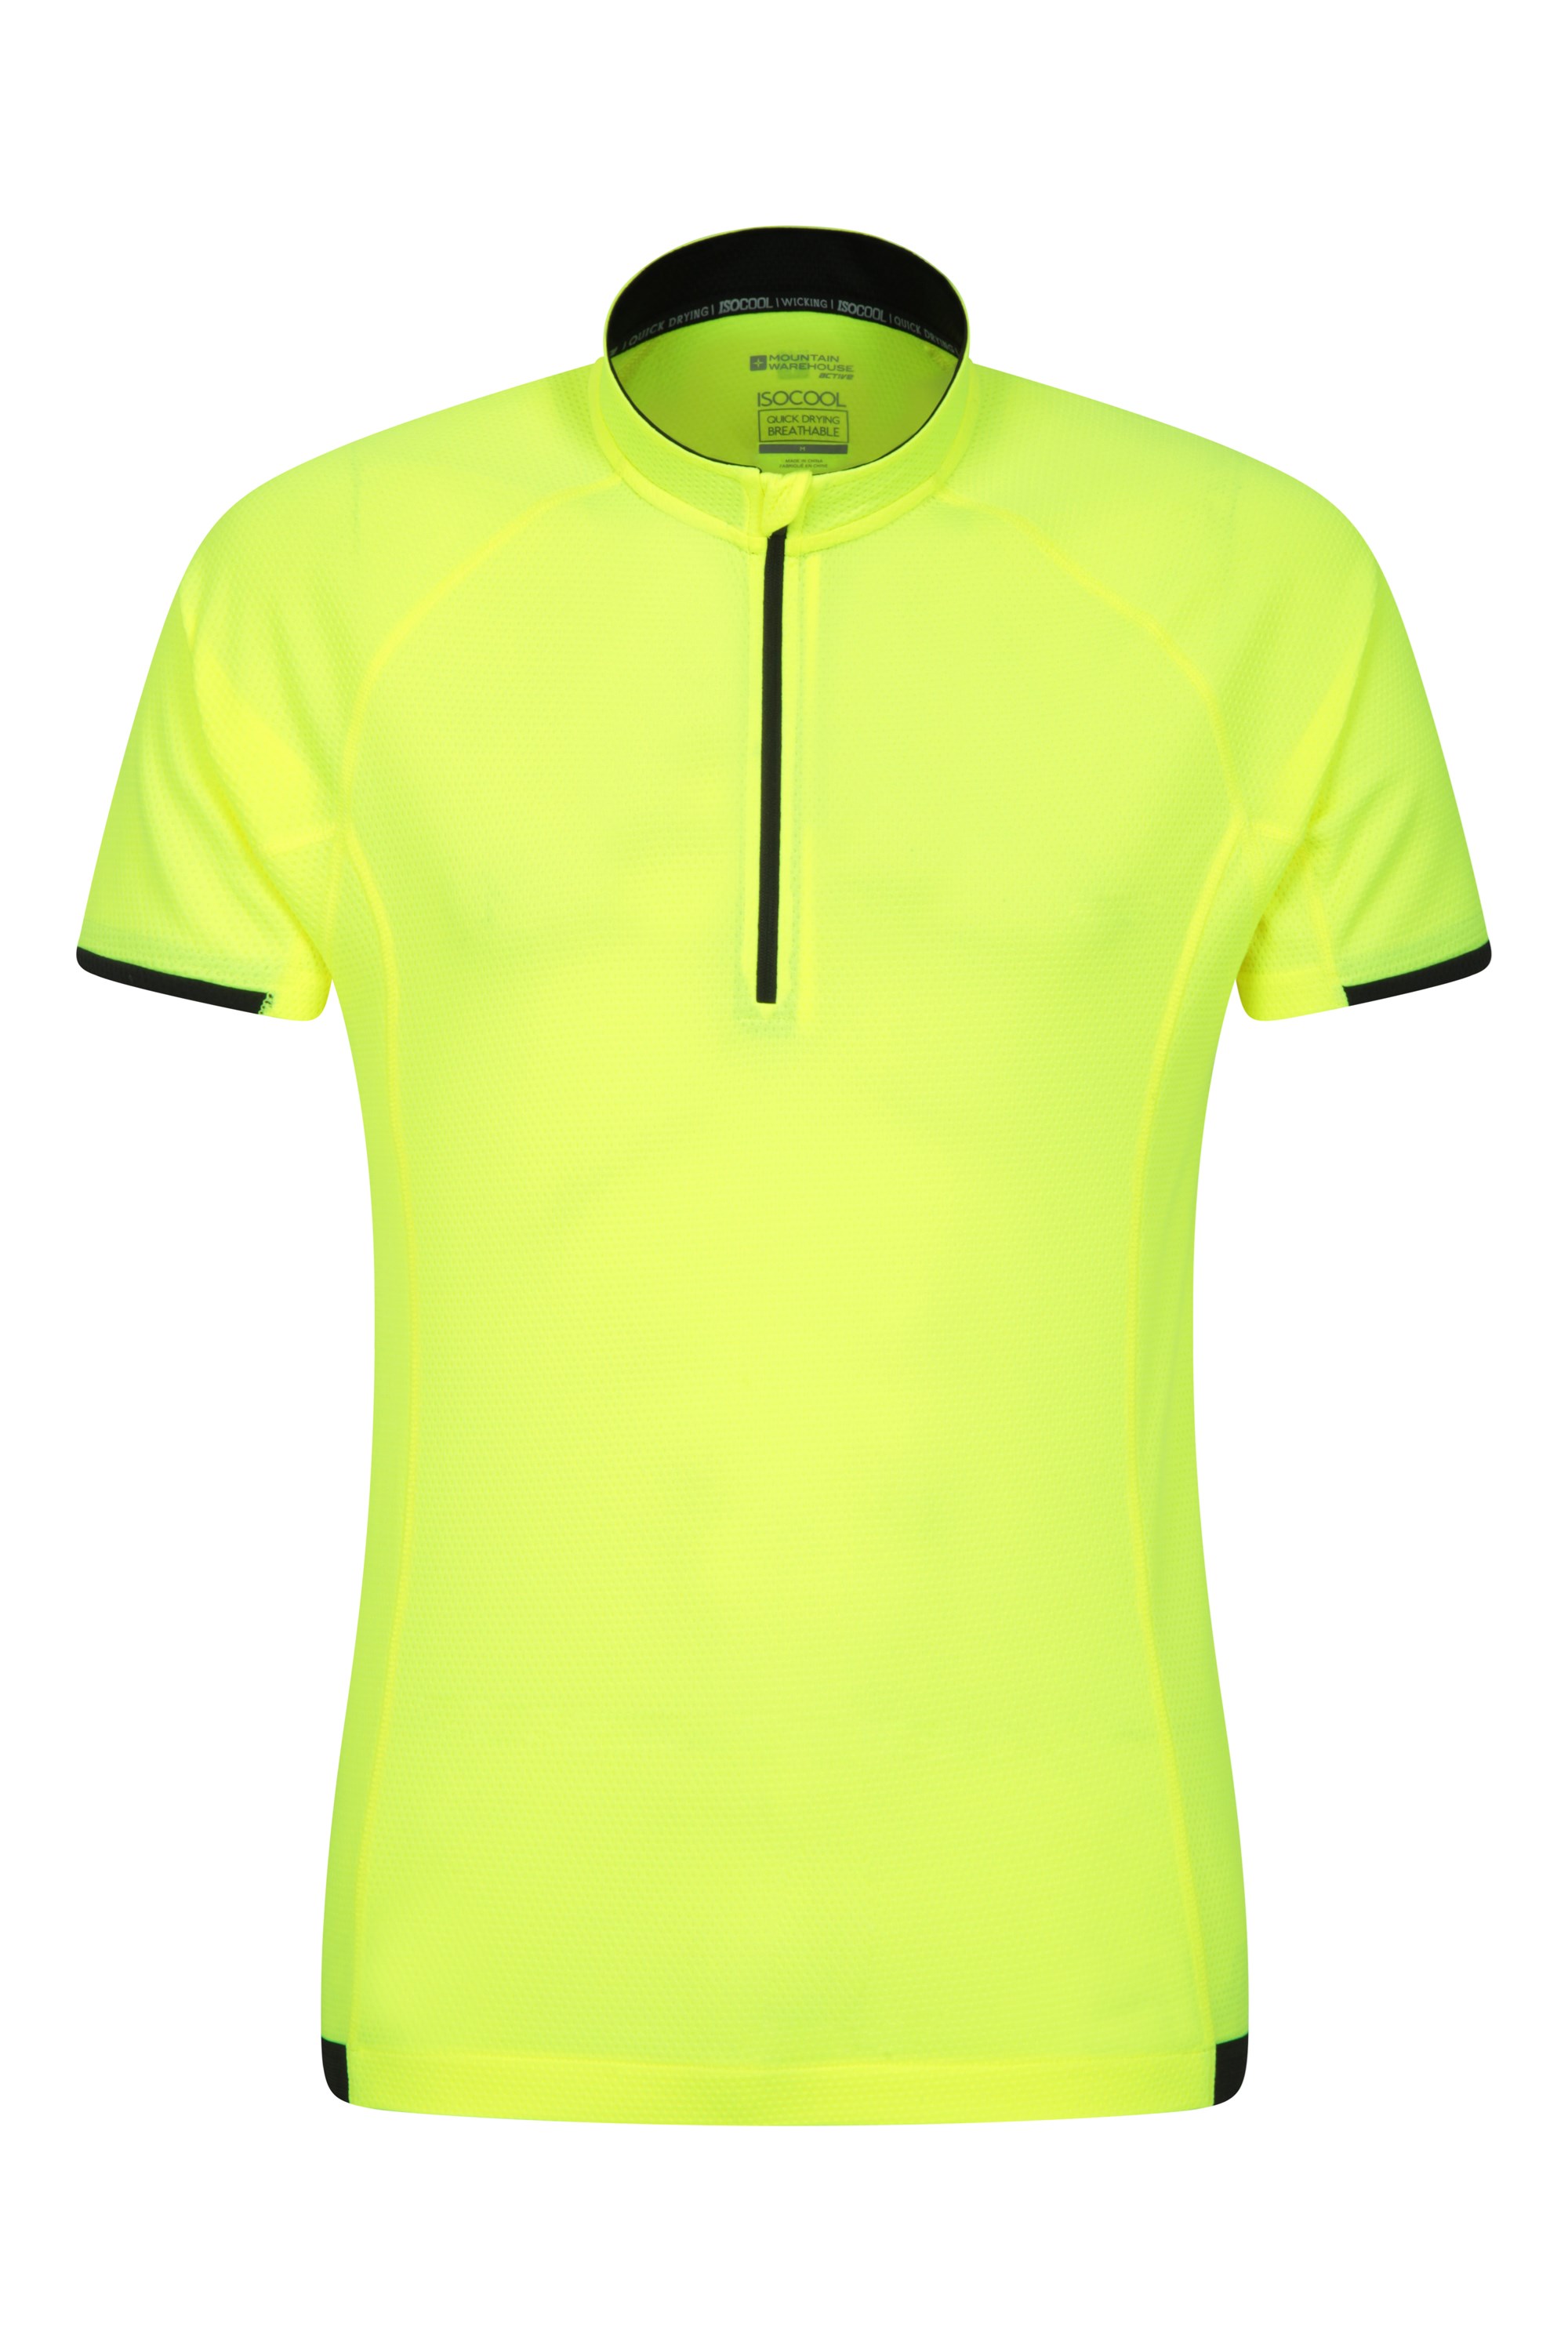 T-Shirt Homme Cycle - Jaune